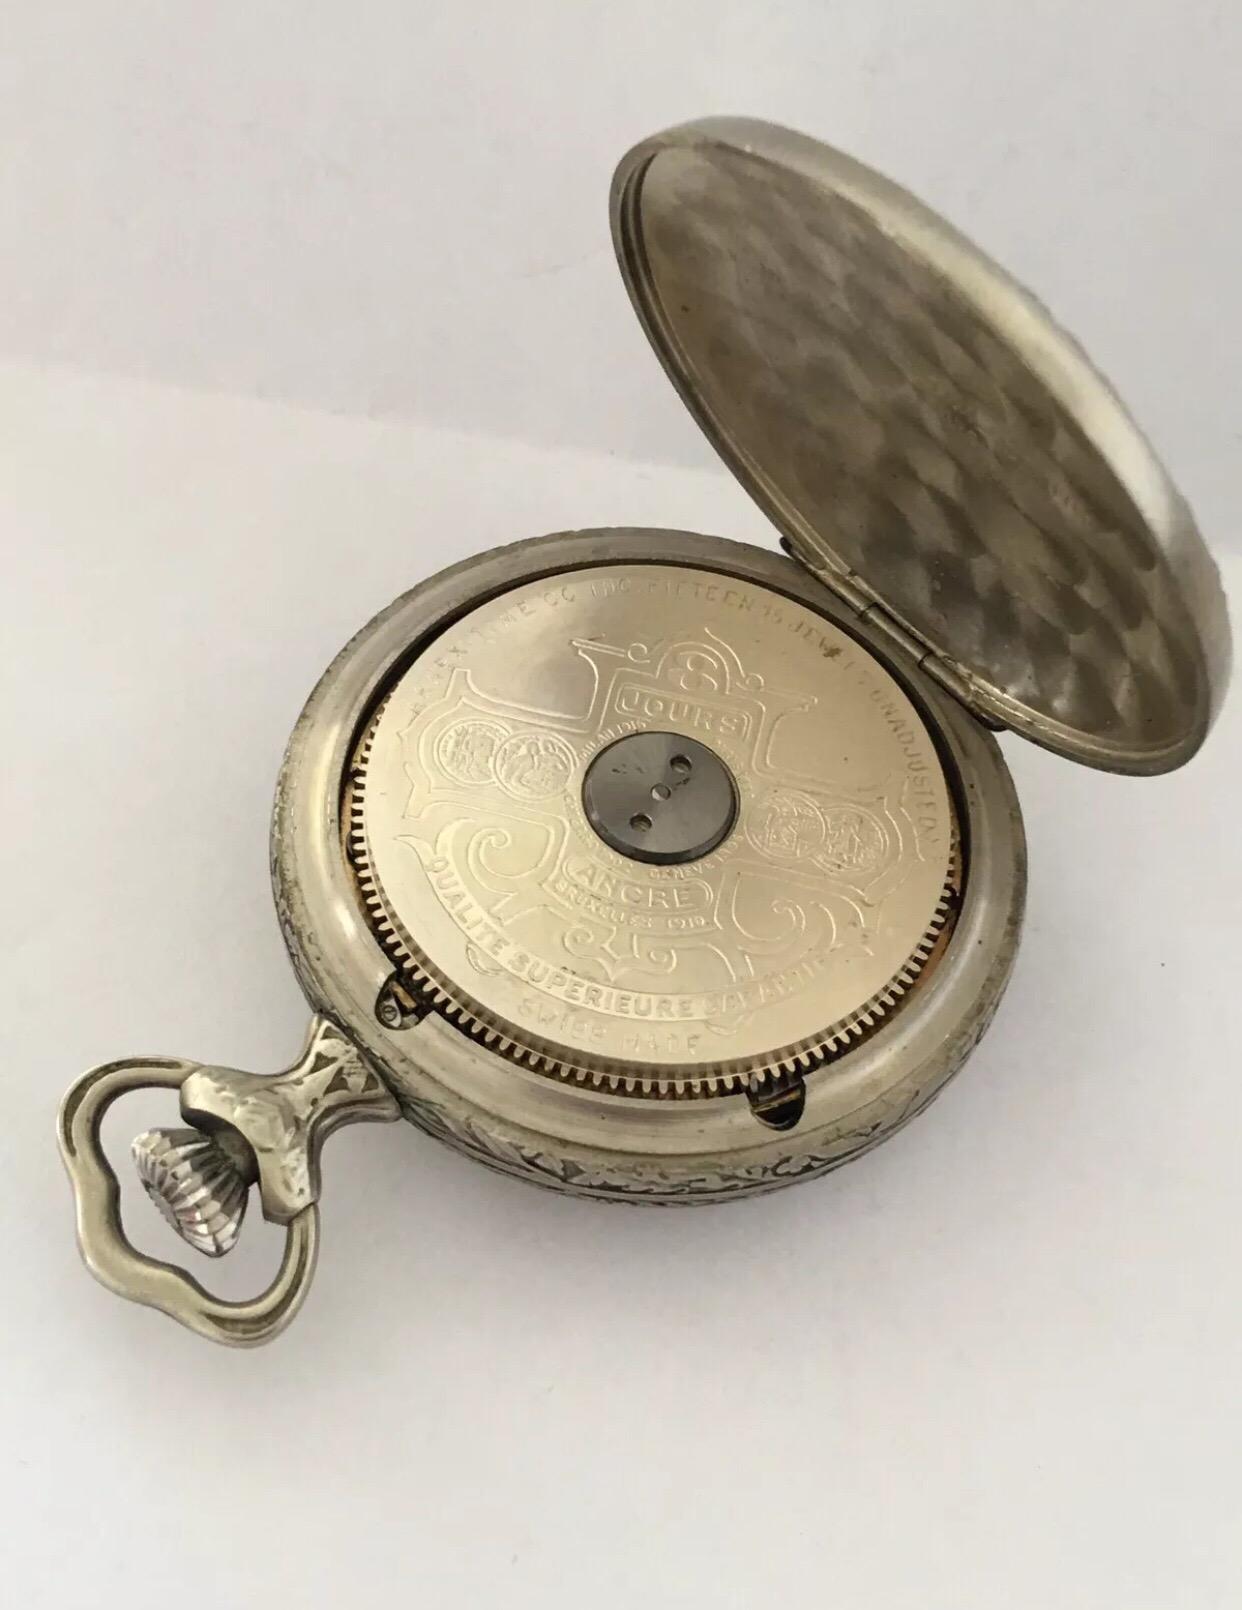 Antique Silver Plated Swiss 8 Day Hebdomas with Visible Escapement Pocket Watch In Good Condition For Sale In Carlisle, GB